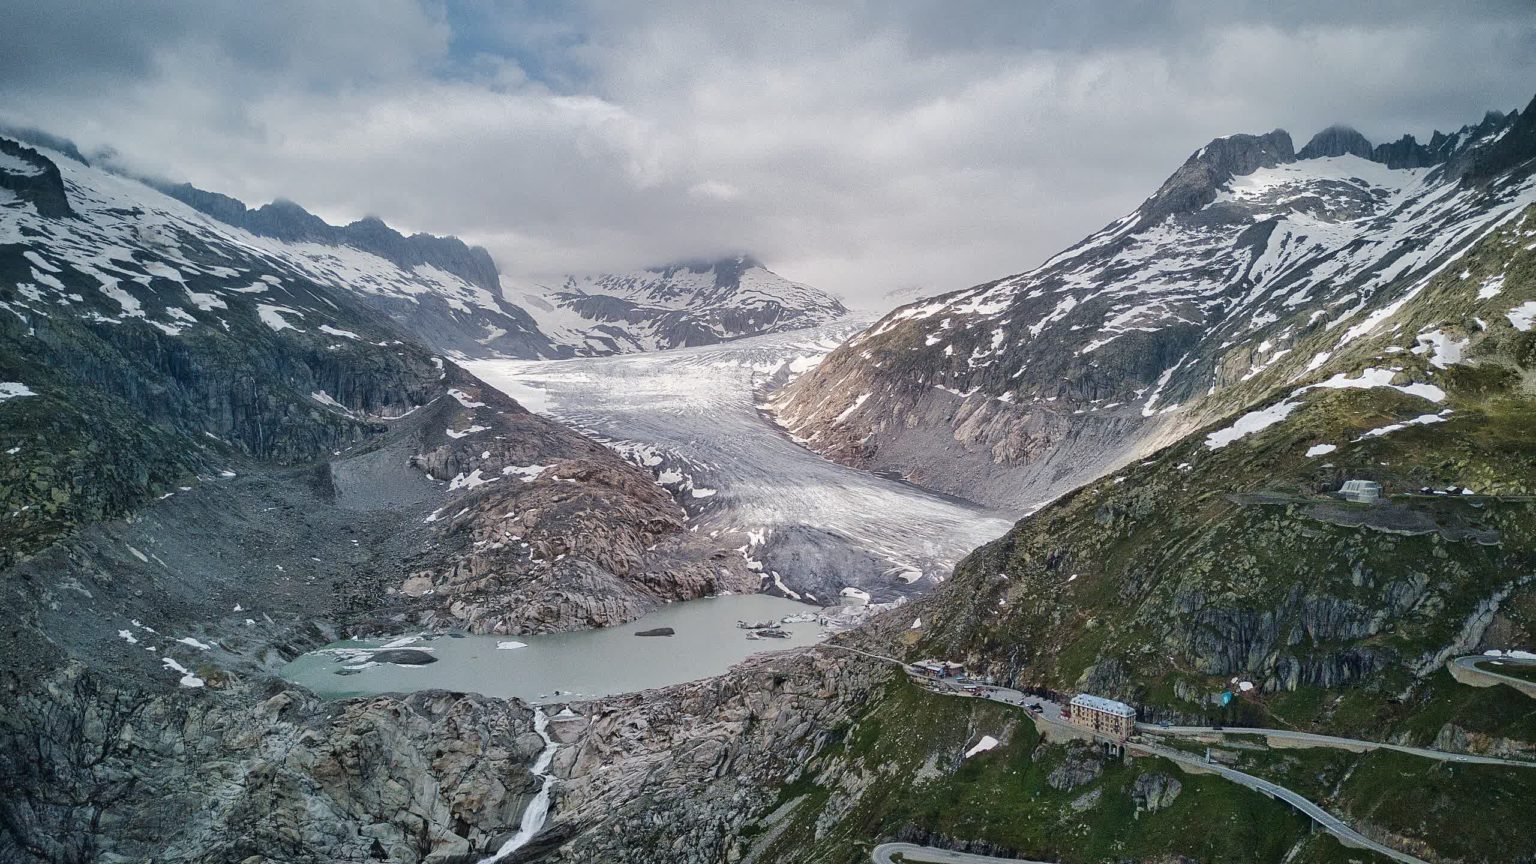 Swiss glaciers are melting at alarming rate, losing 10% volume in just two years